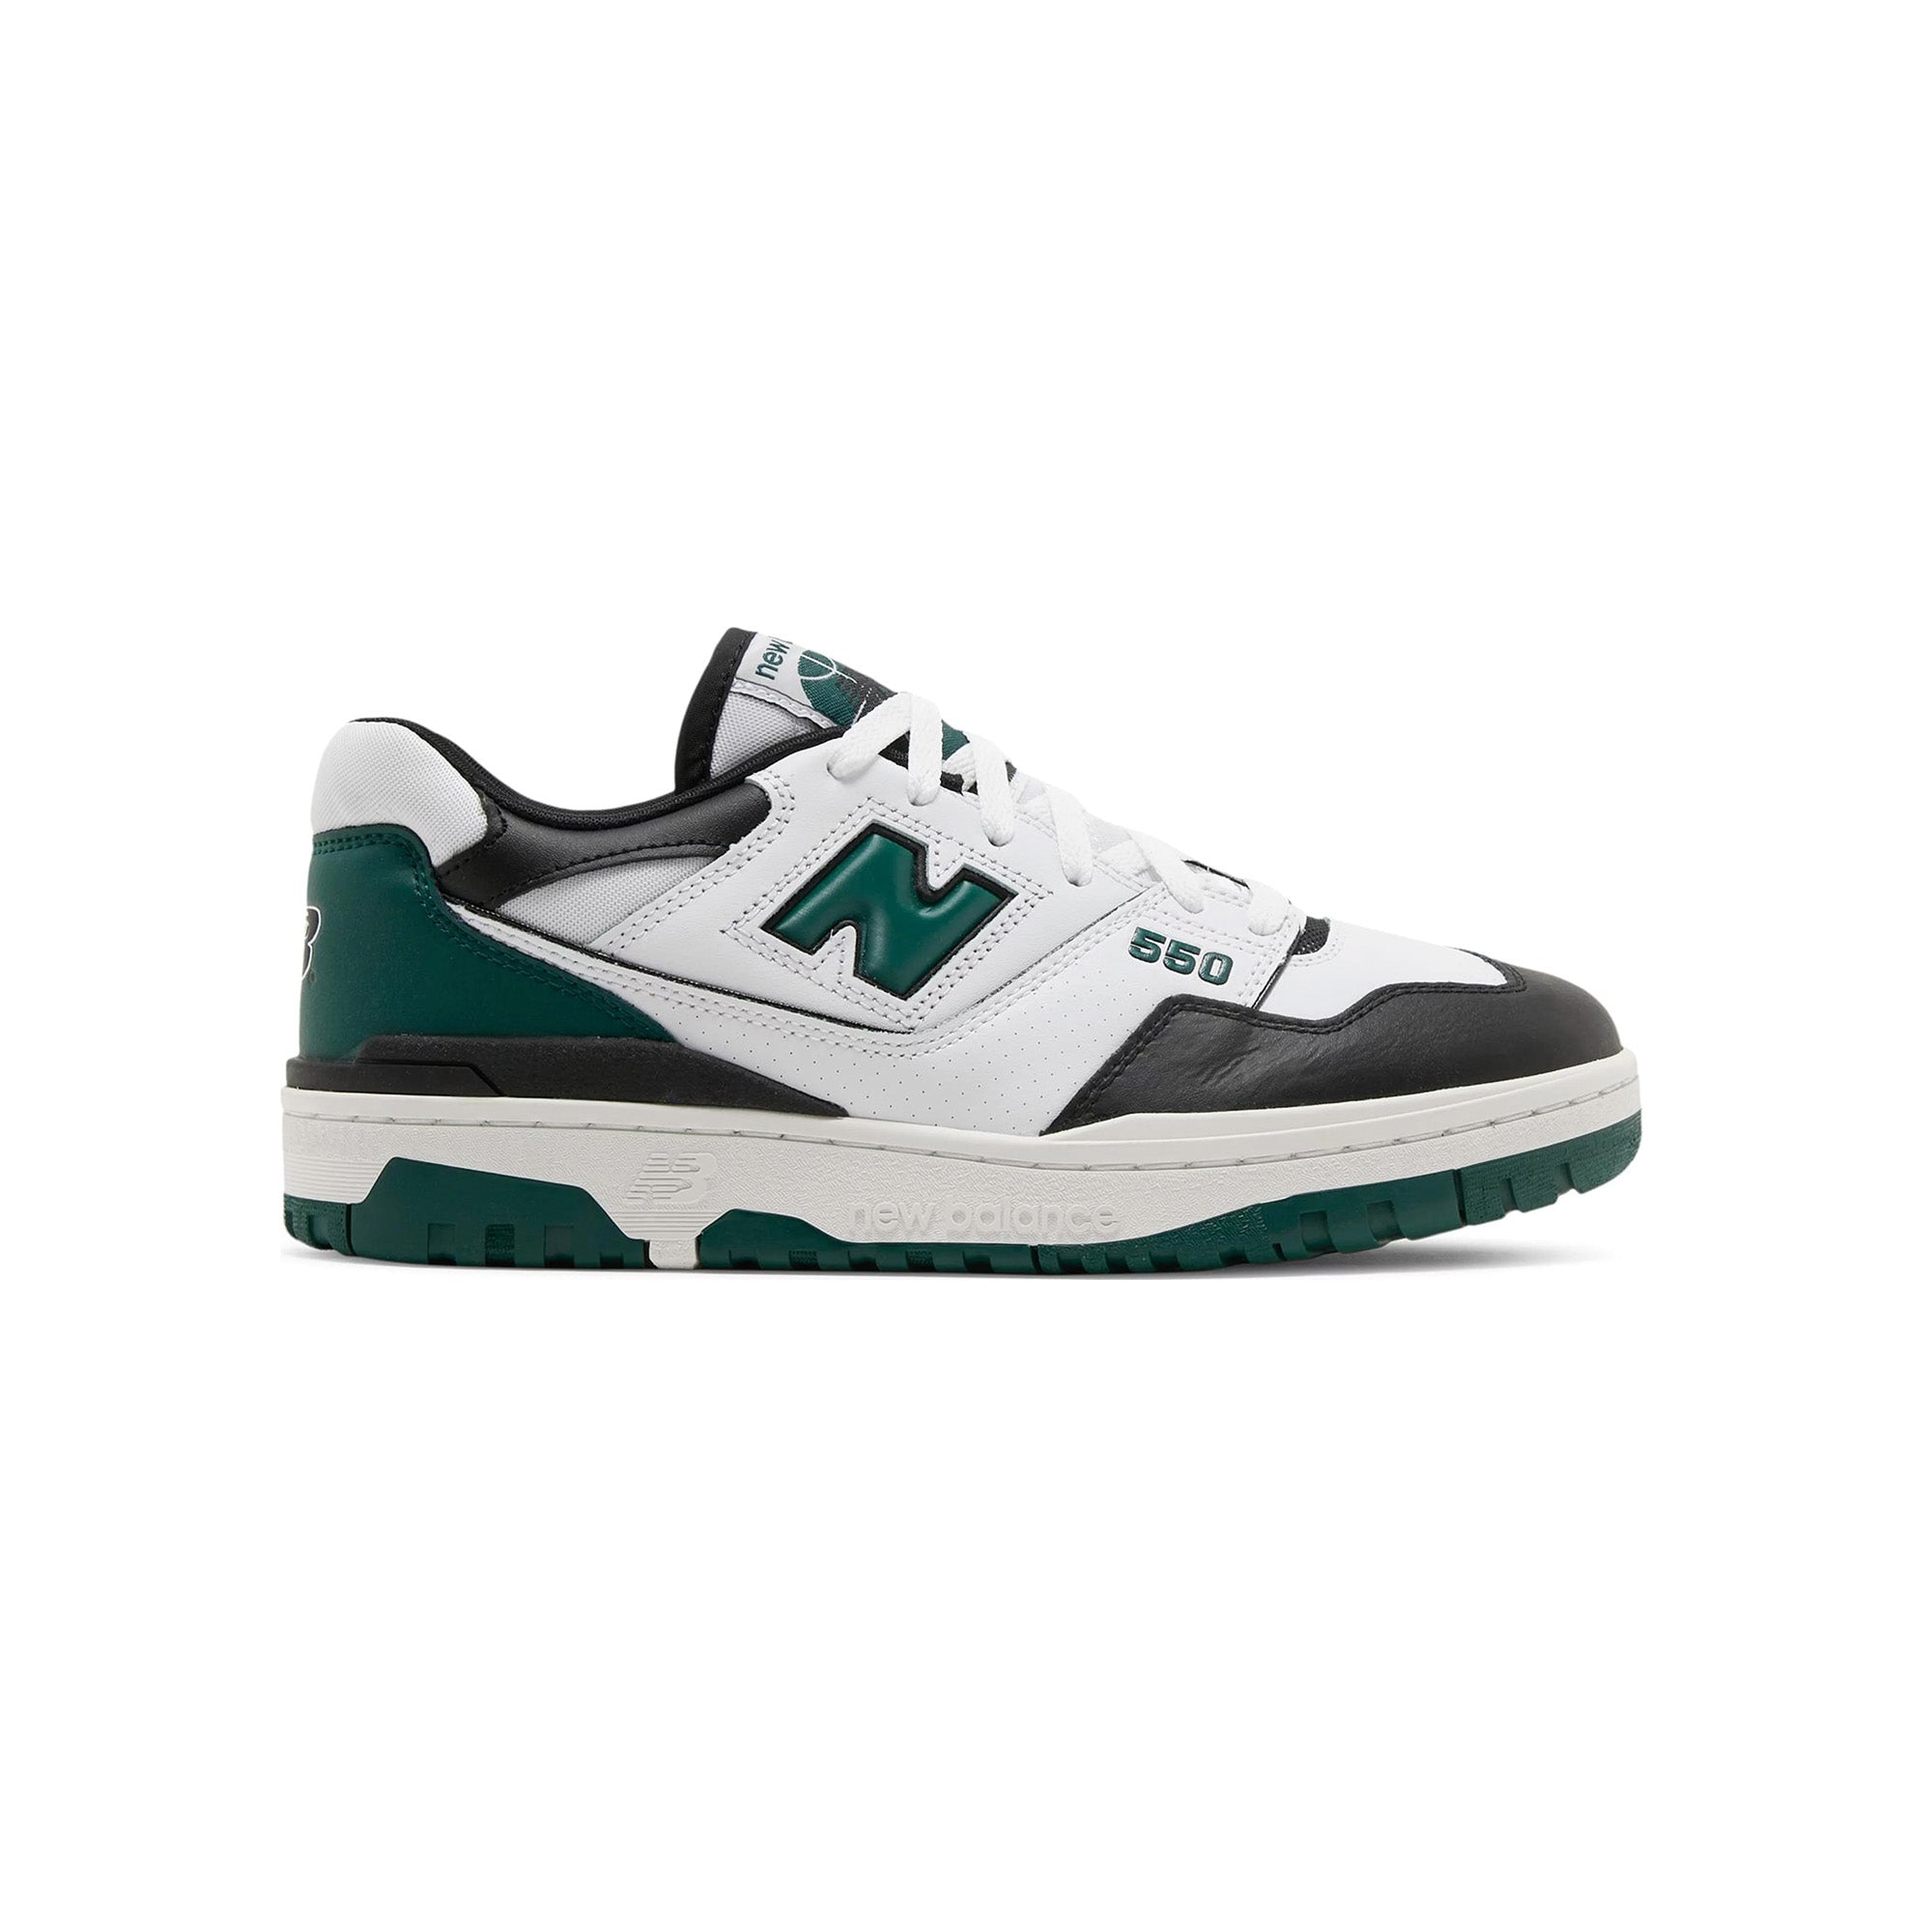 New Balance 550 Shifted Sport Pack - Green